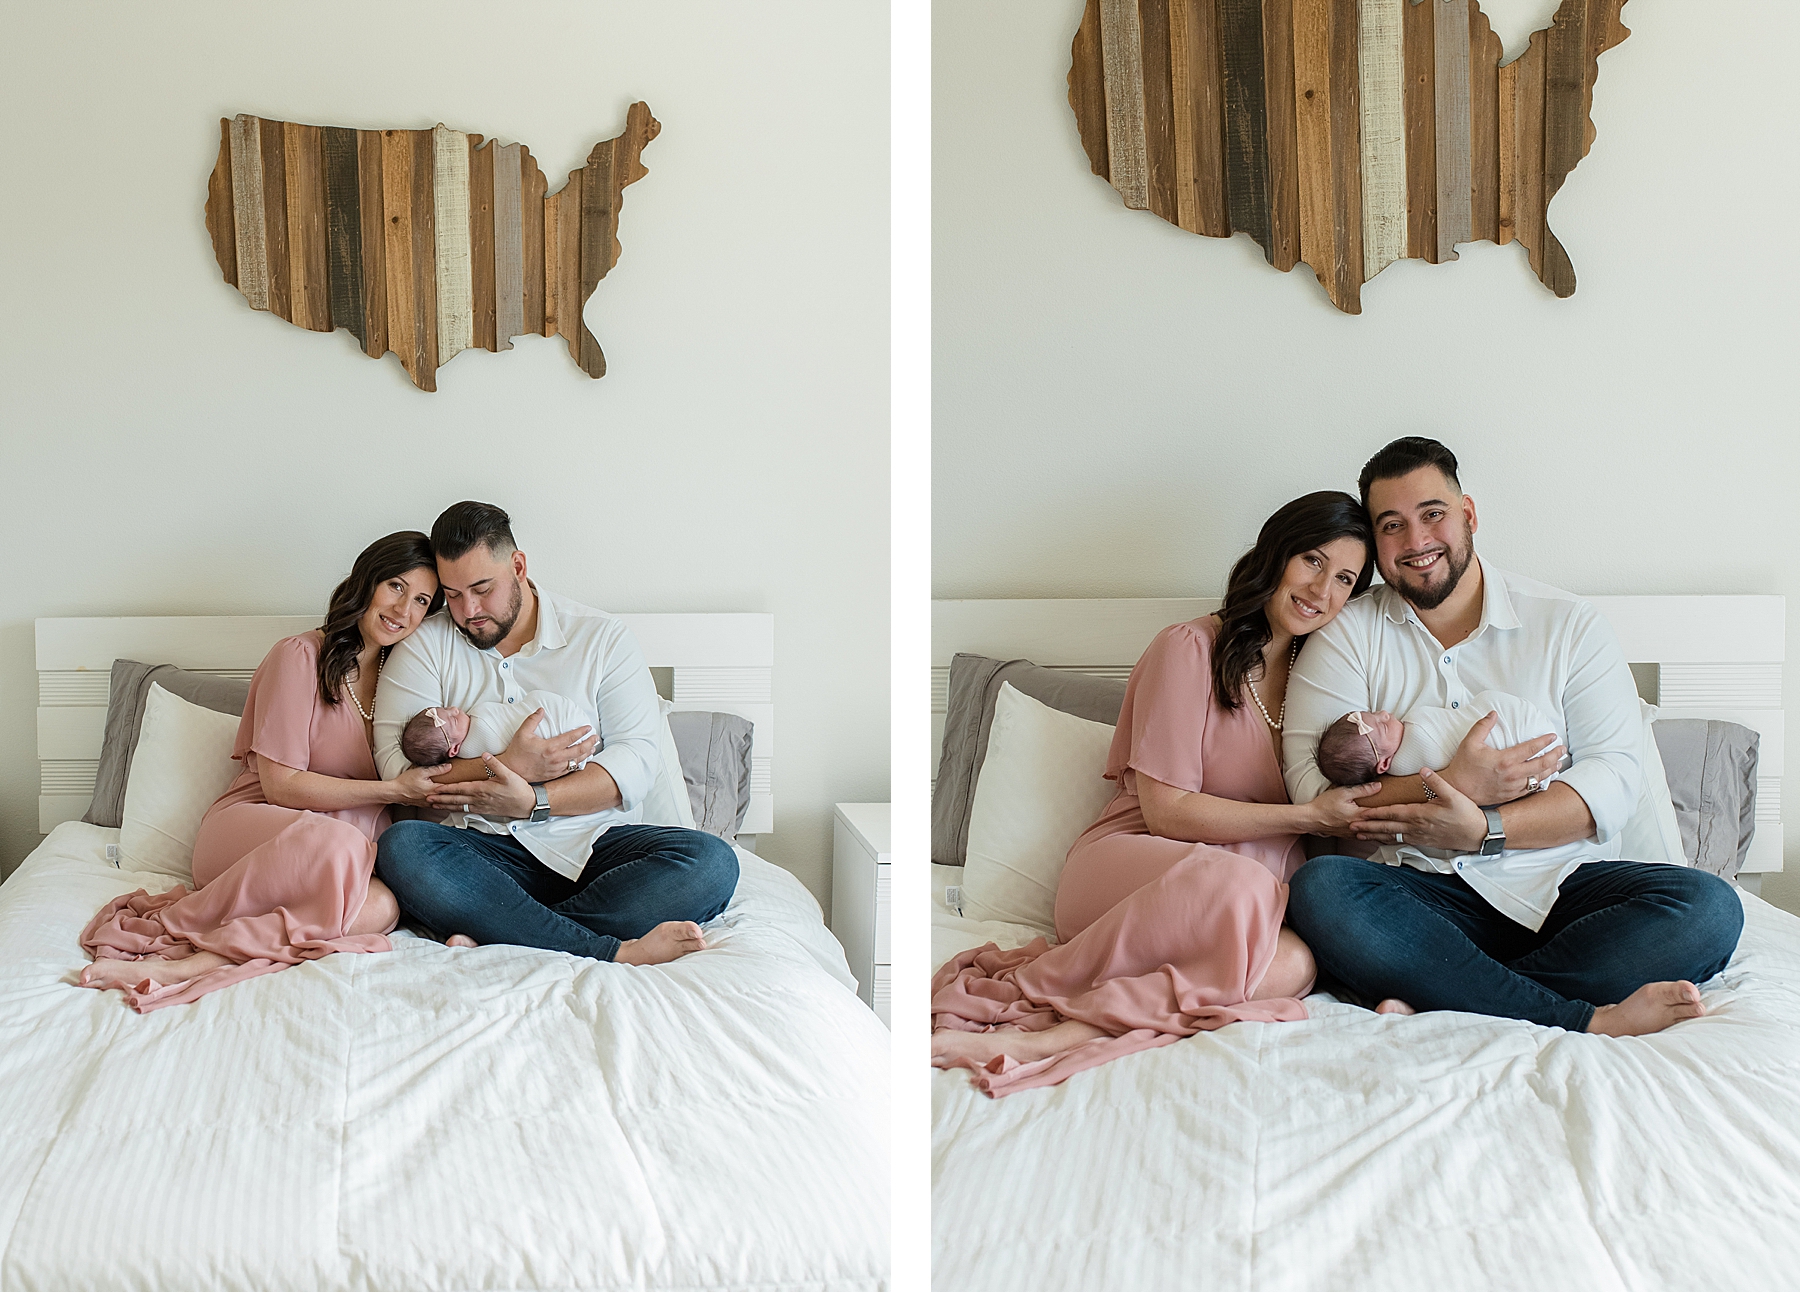 Mom and dad sitting in bed with newborn baby girl | In-Home Newborn Photo Session | Lindsey Dutton Photography | Dallas Area Family Photographer | newborn session, newborn posing ideas, newborn photos, girl nursery inspiration | via lindseyduttonphotography.com